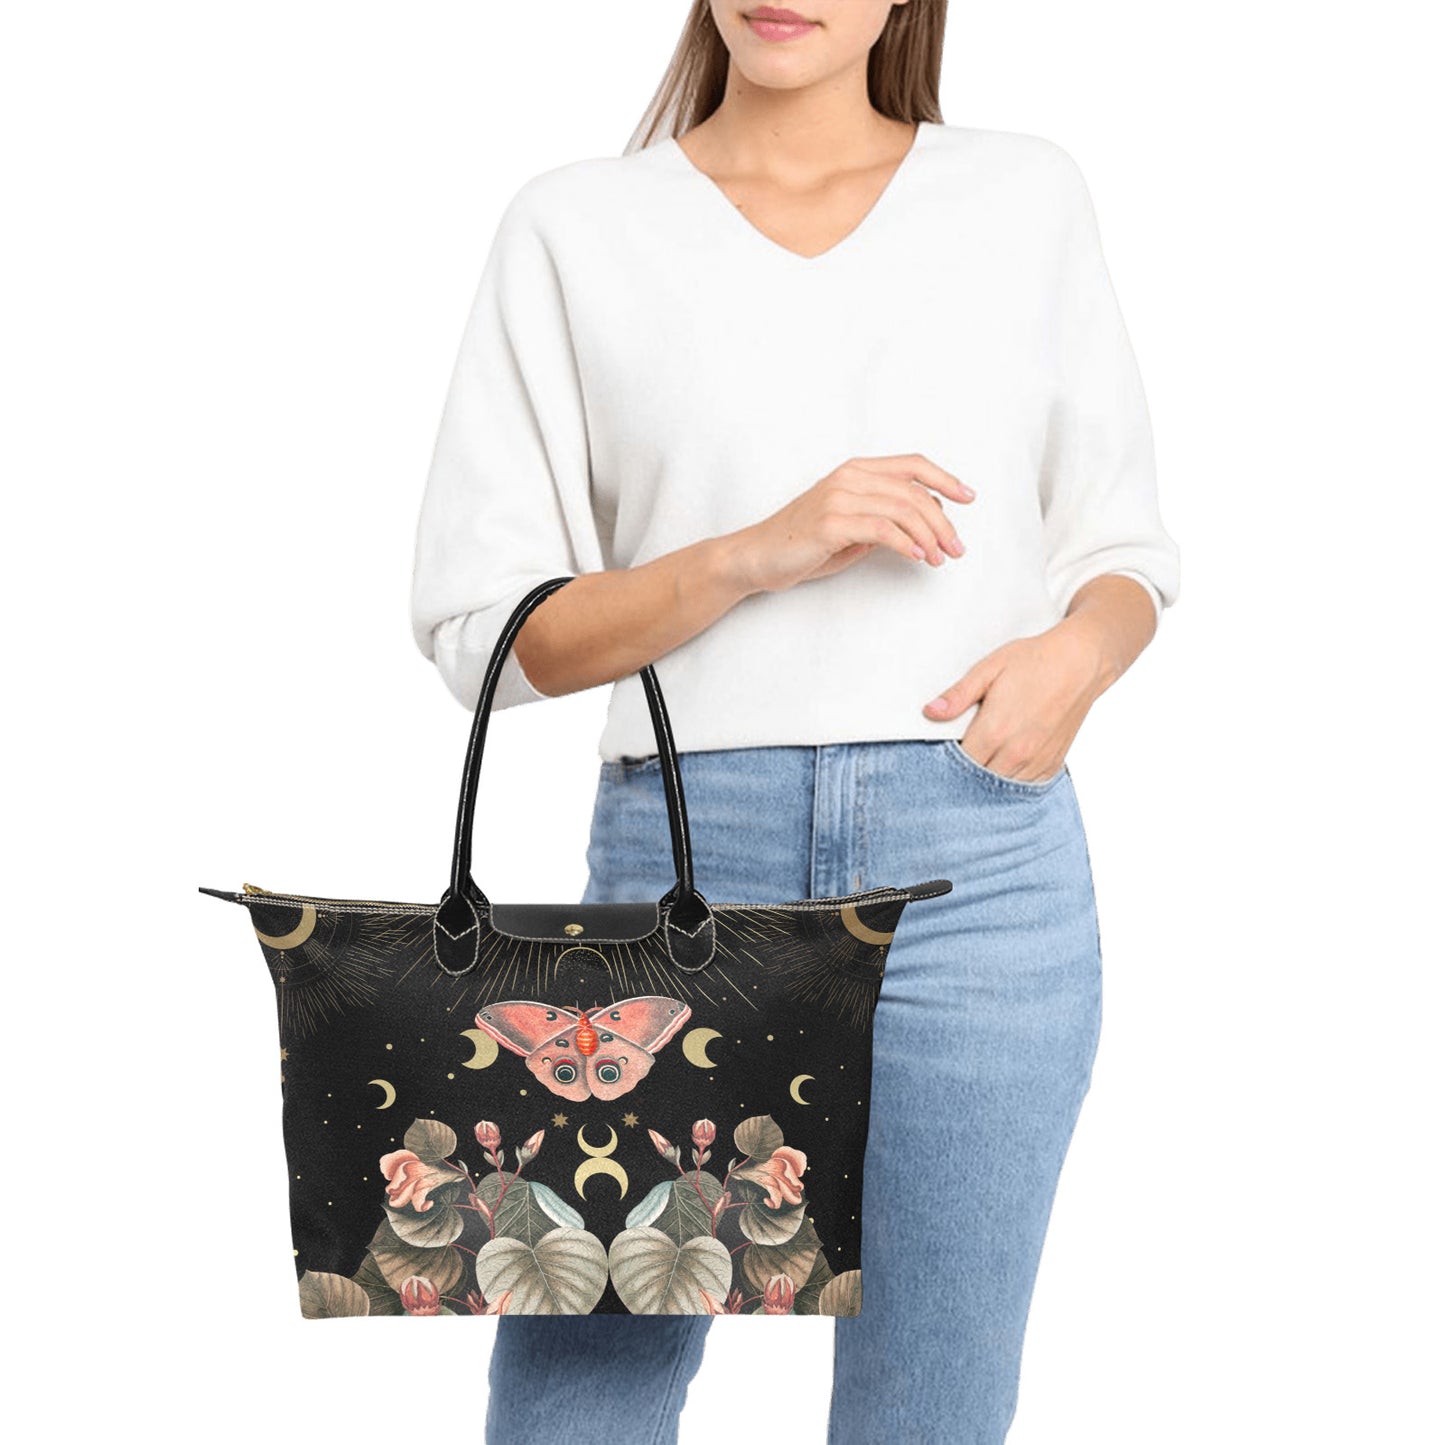 Moon Phase Moth Butterfly Fabric zip tote classic Handbag